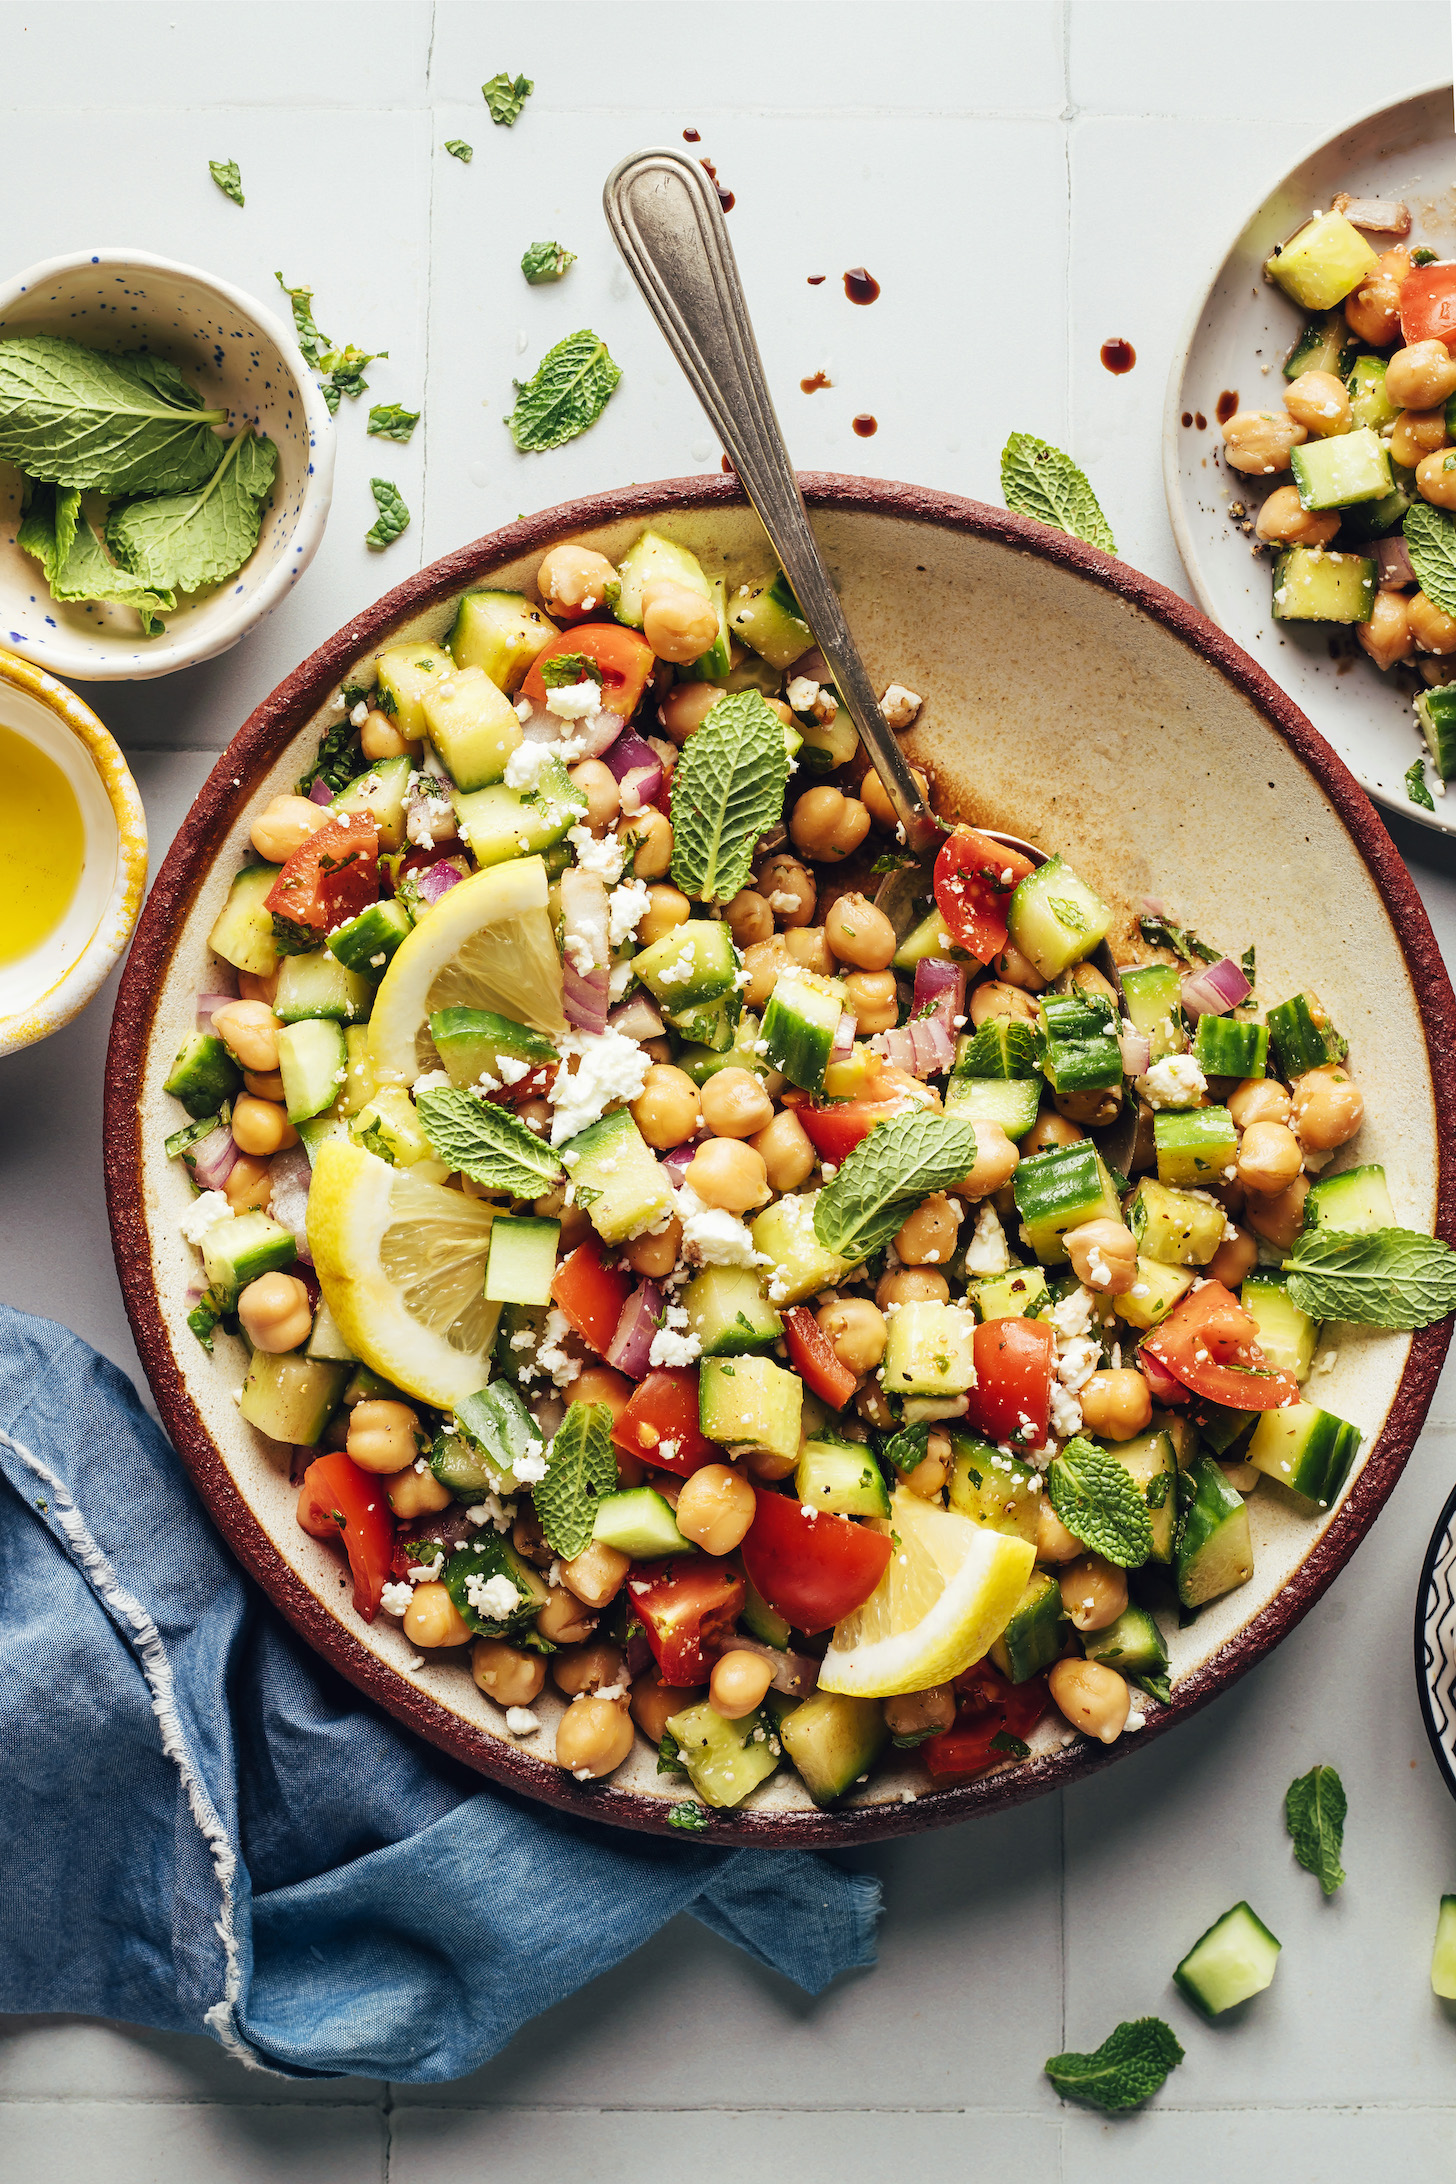 Spoon resting in a bowl of cucumber tomato chickpea salad